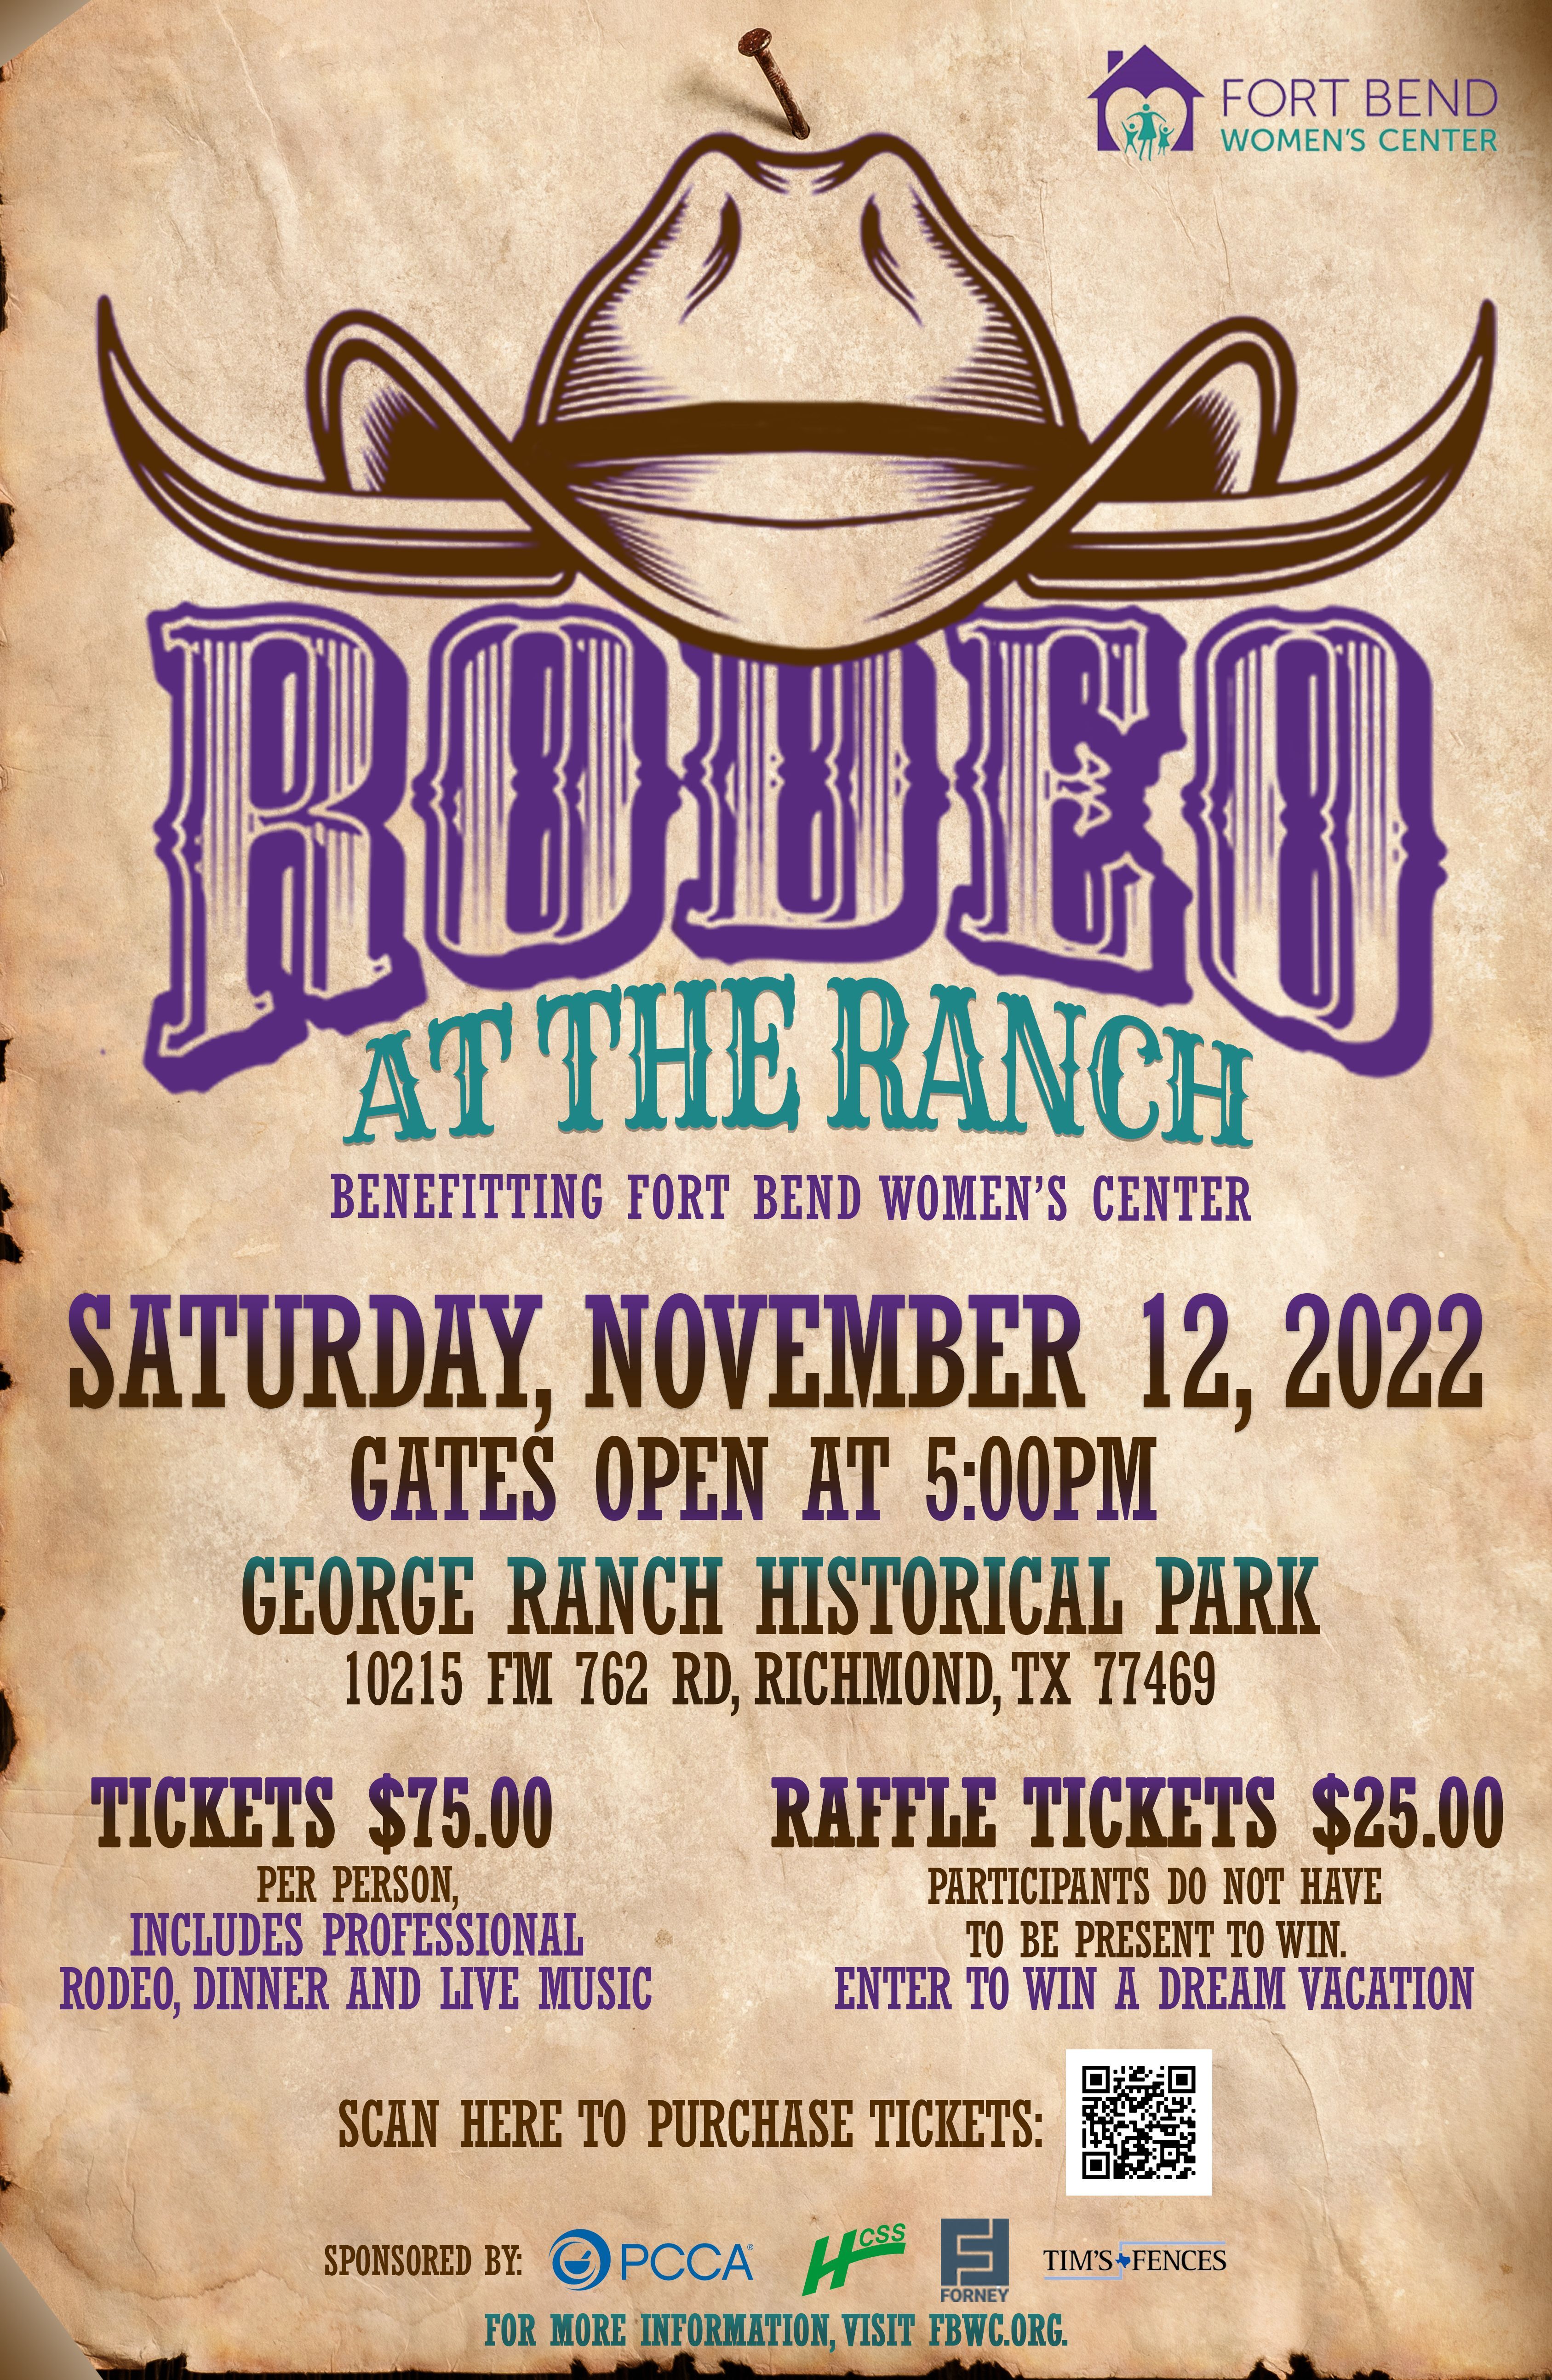 Fort Bend Women’s Center is Hosting Rodeo at the Ranch